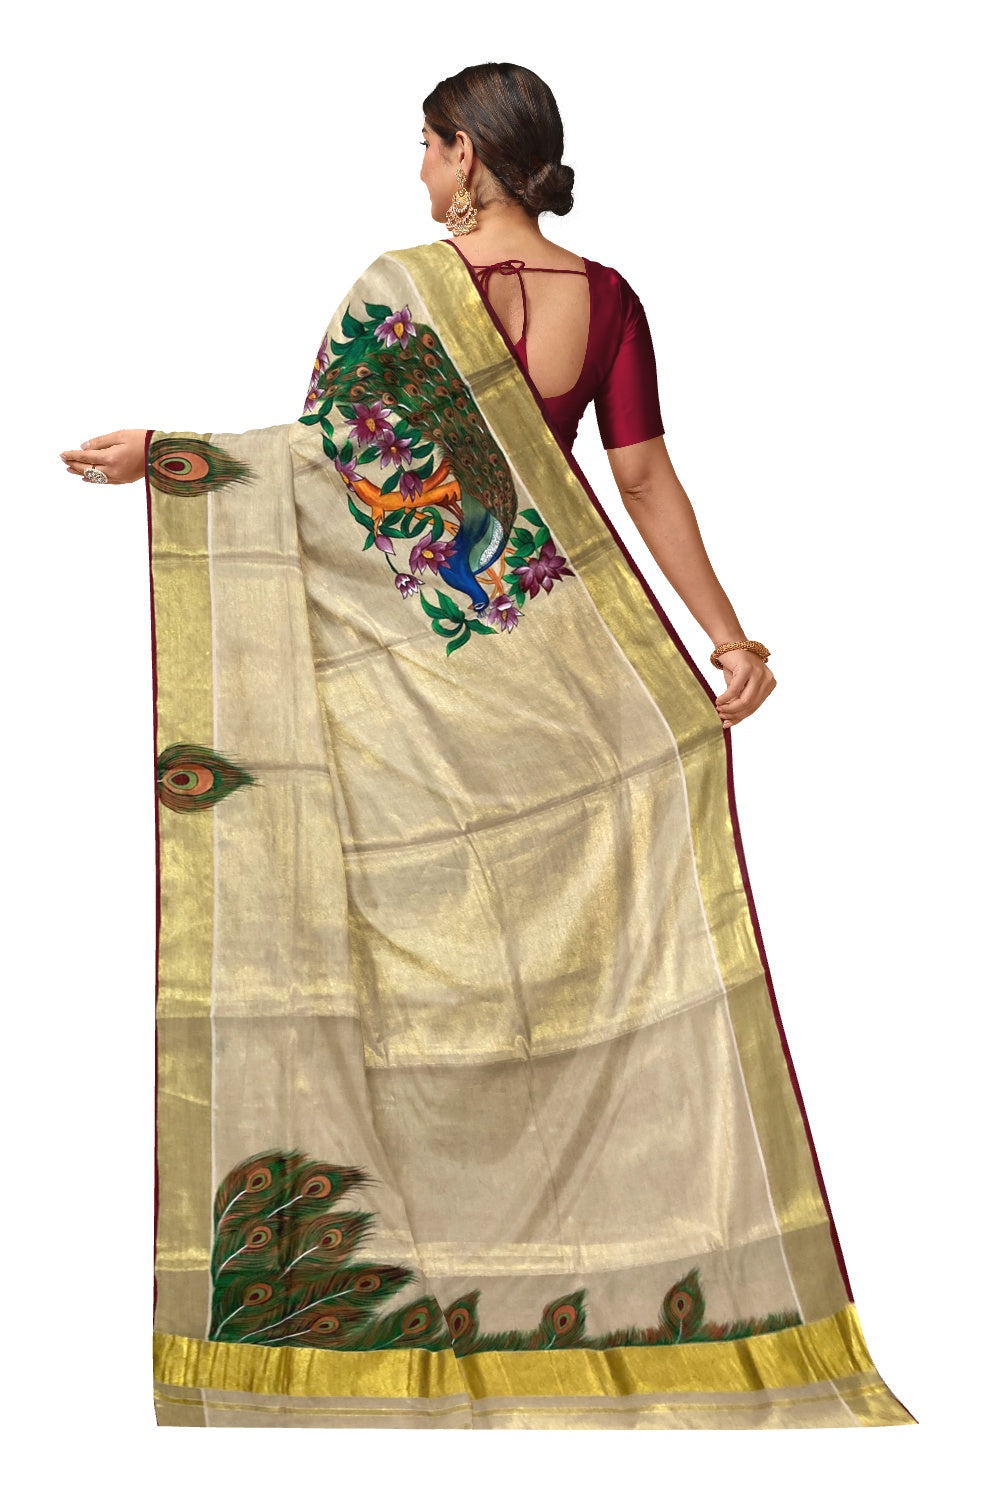 Kerala Tissue Kasavu Saree with Hand Painted Feather Design and Maroon on Border